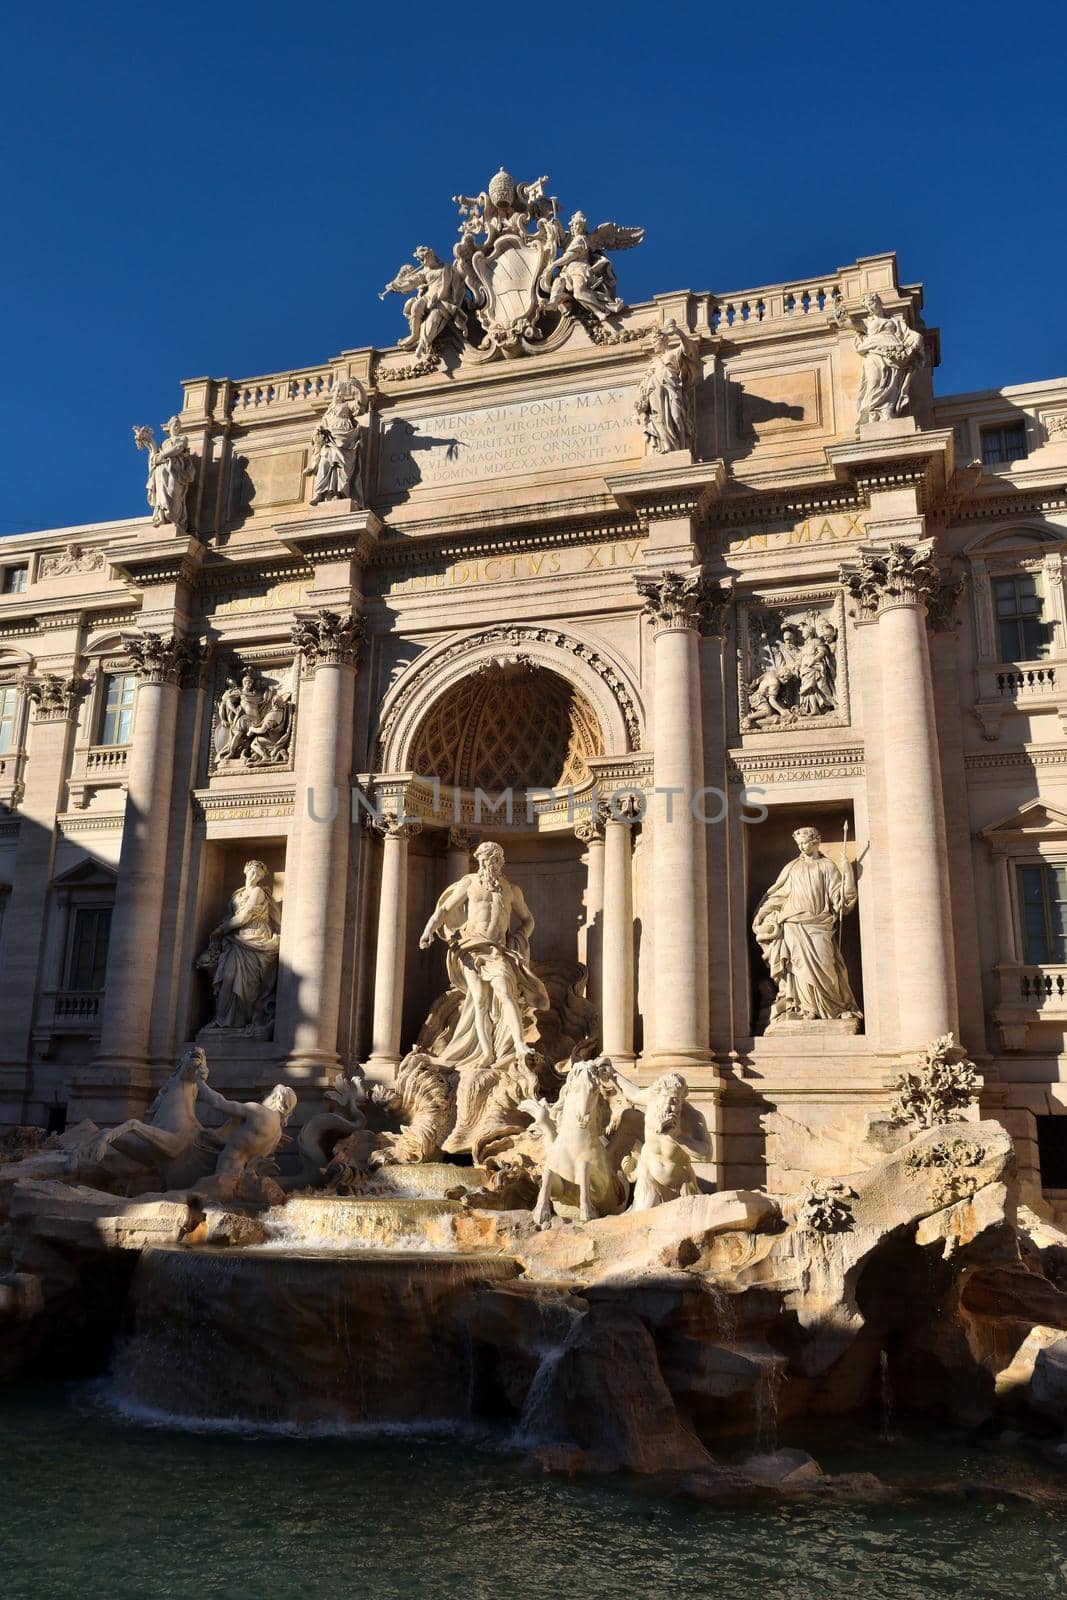 View of the Trevi fountain, Rome, Italy by silentstock639